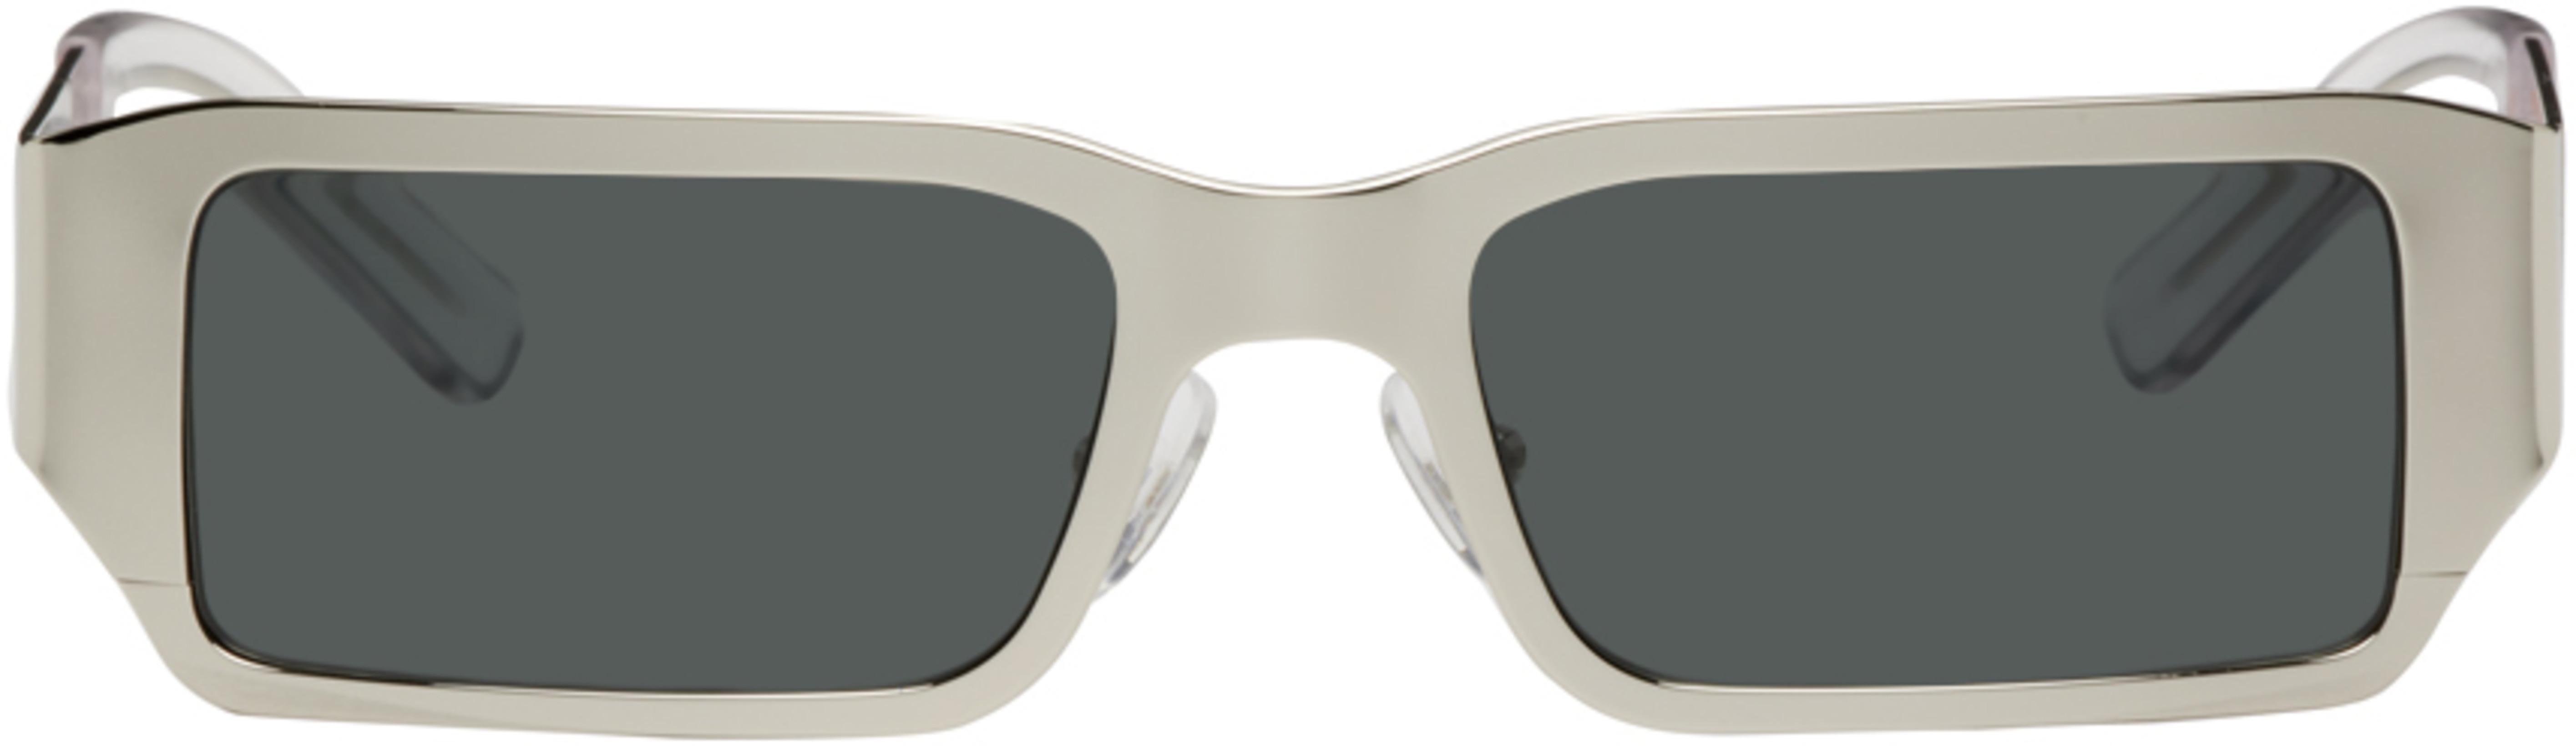 Silver Pollux Sunglasses by A BETTER FEELING